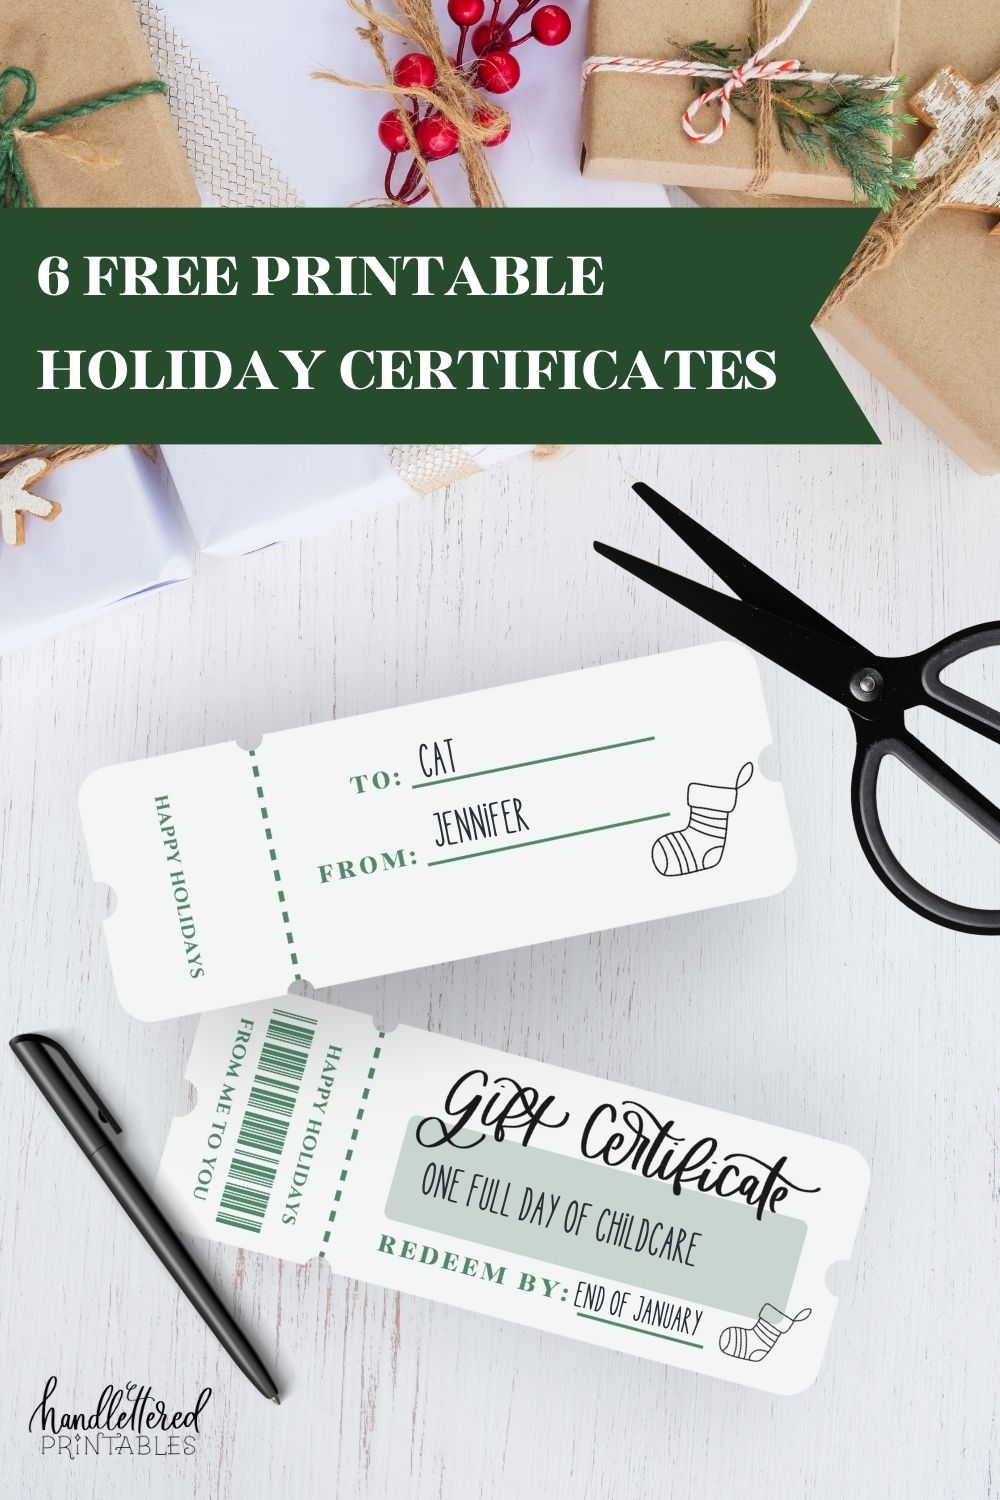 text over reads 6 free printable holiday certificates- image of green christmas certificate printed and cut out with hand written gift on